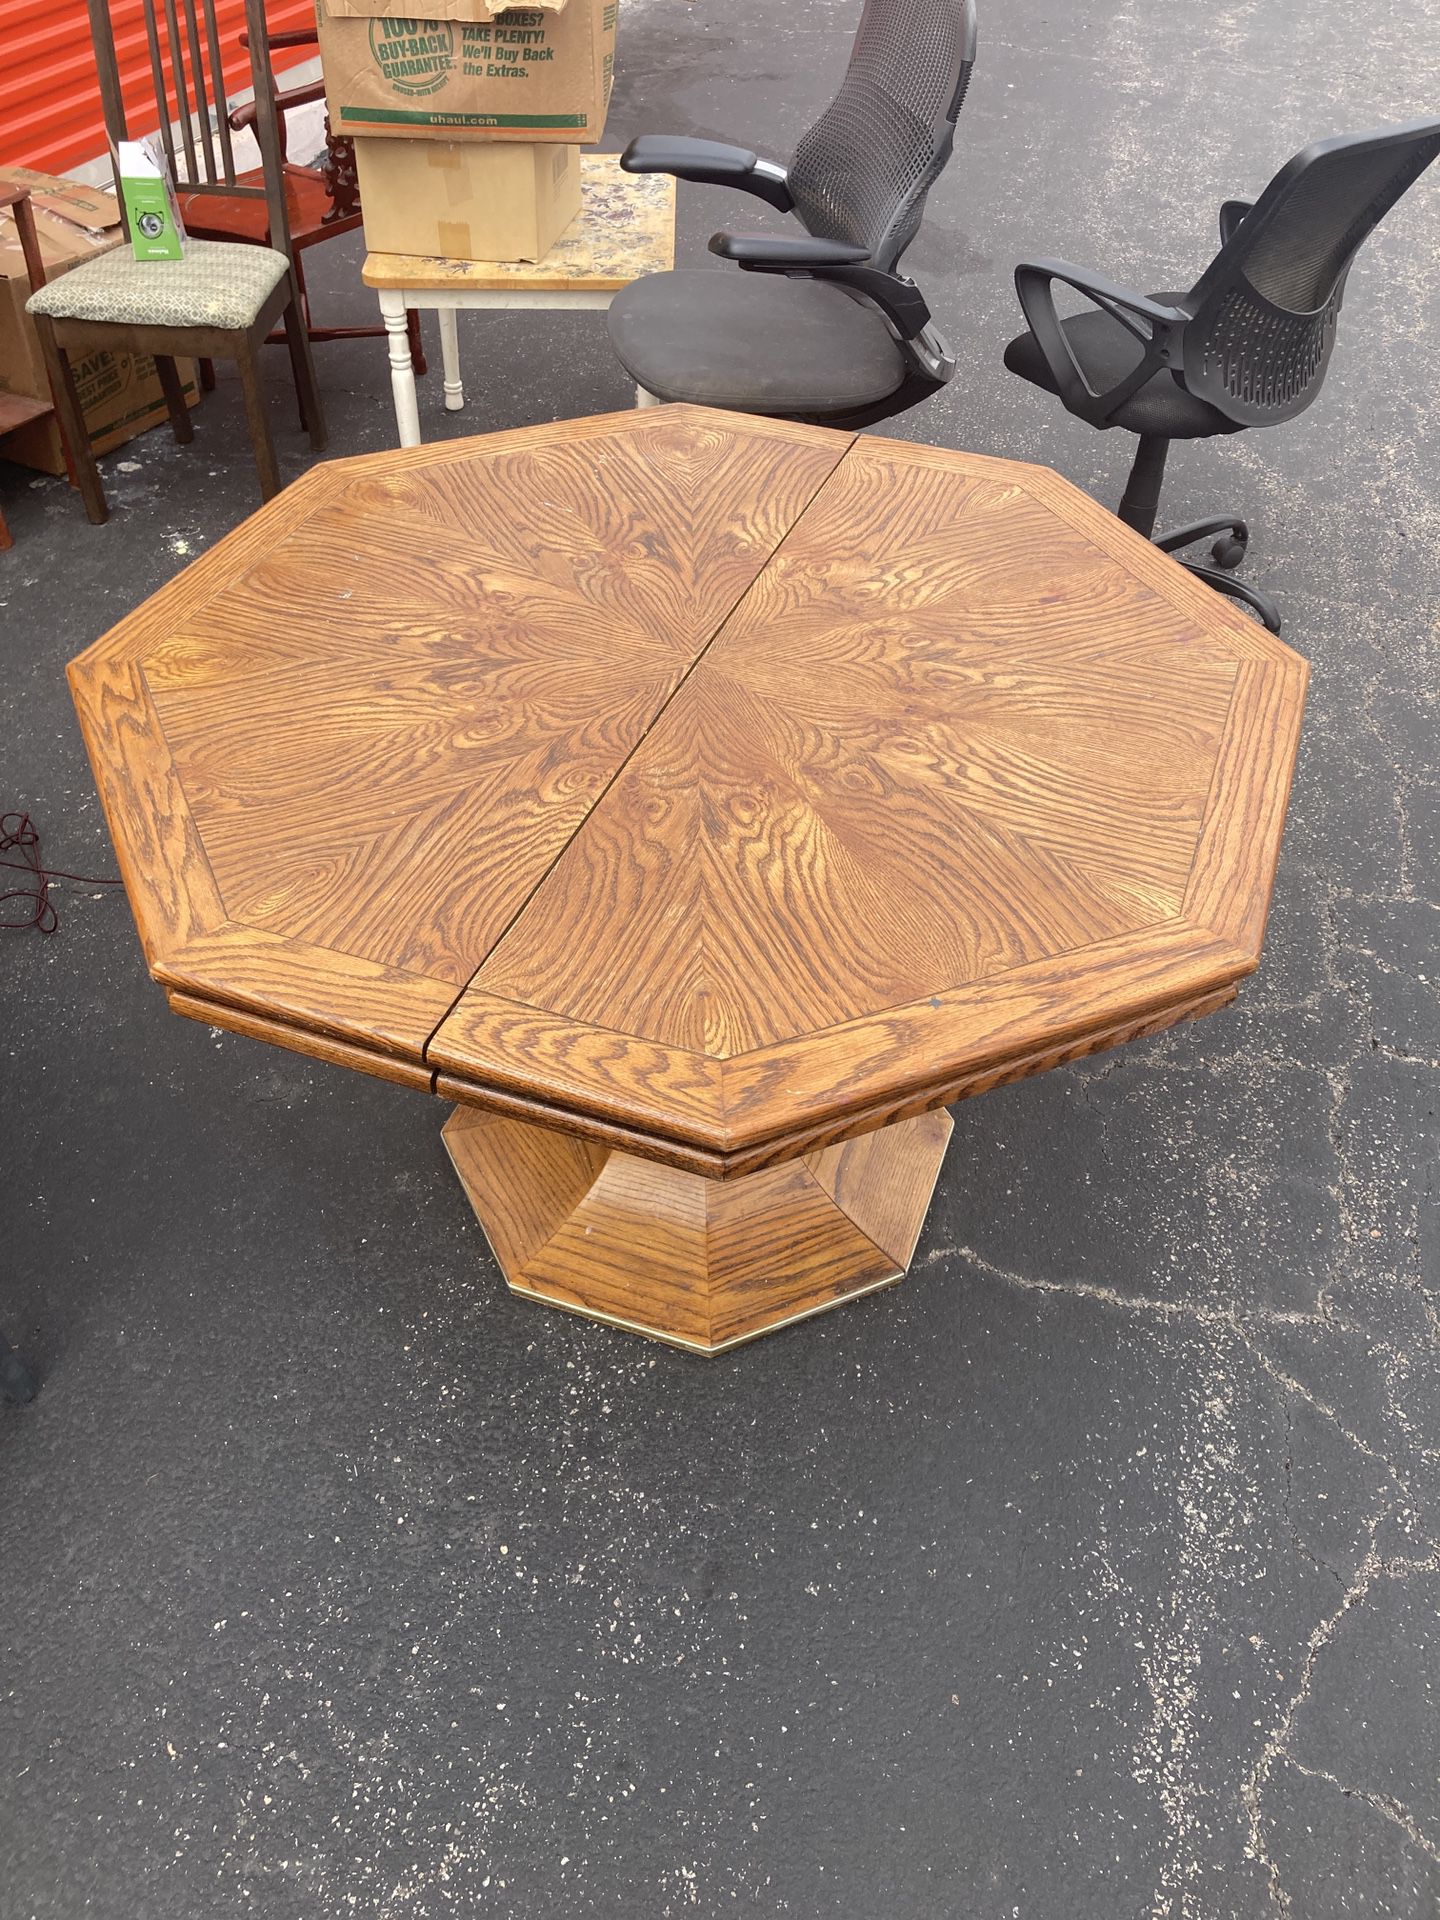 Beautiful Antique hardwood dining table with Leaf Insert